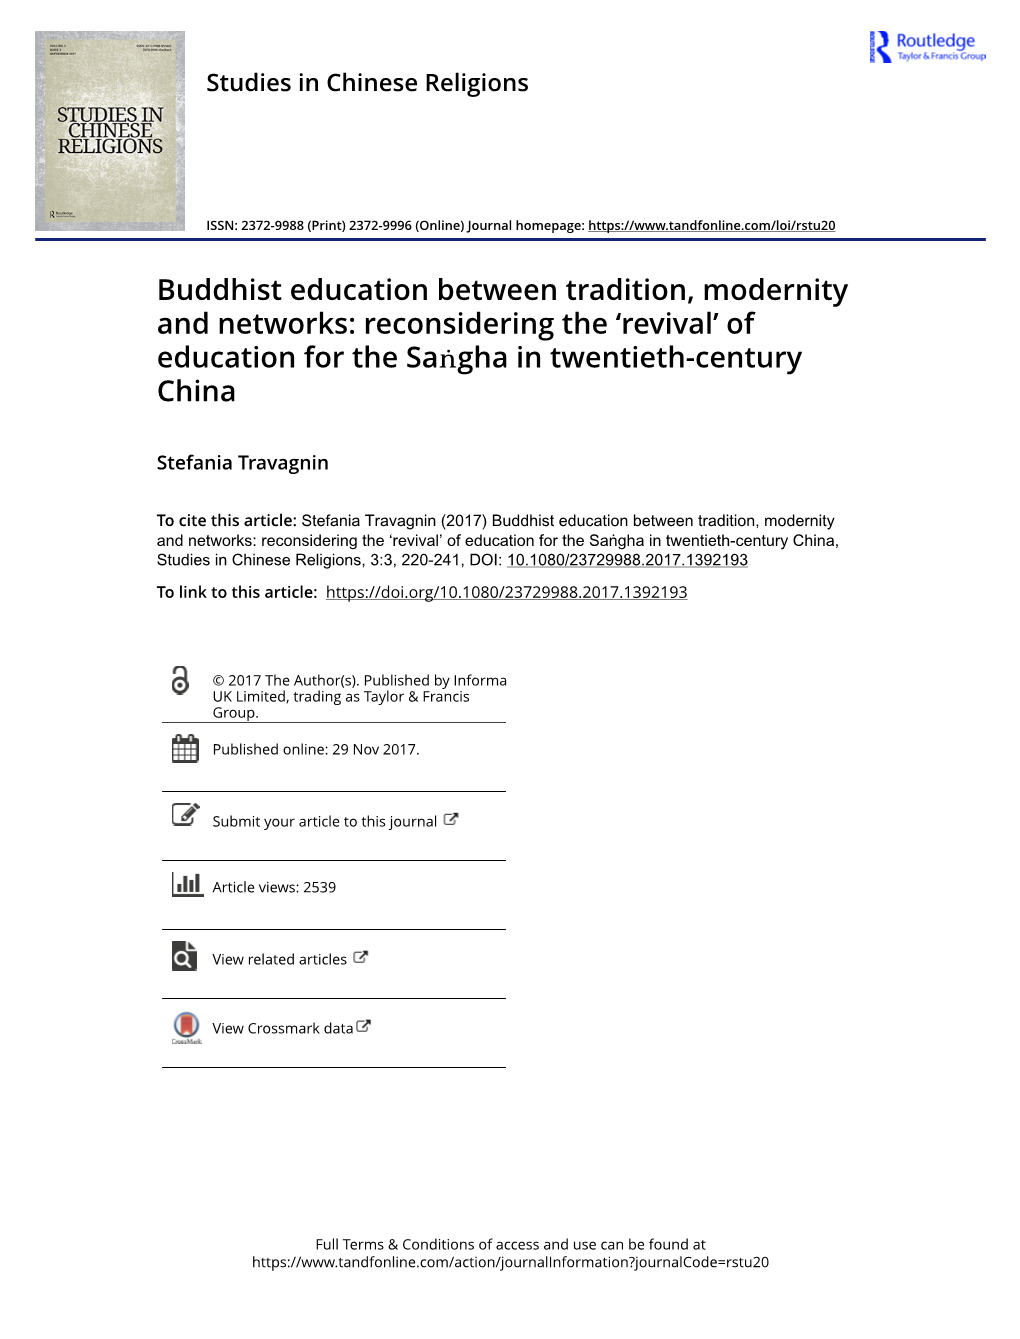 Buddhist Education Between Tradition, Modernity and Networks: Reconsidering the ‘Revival’ of Education for the Saṅgha in Twentieth-Century China